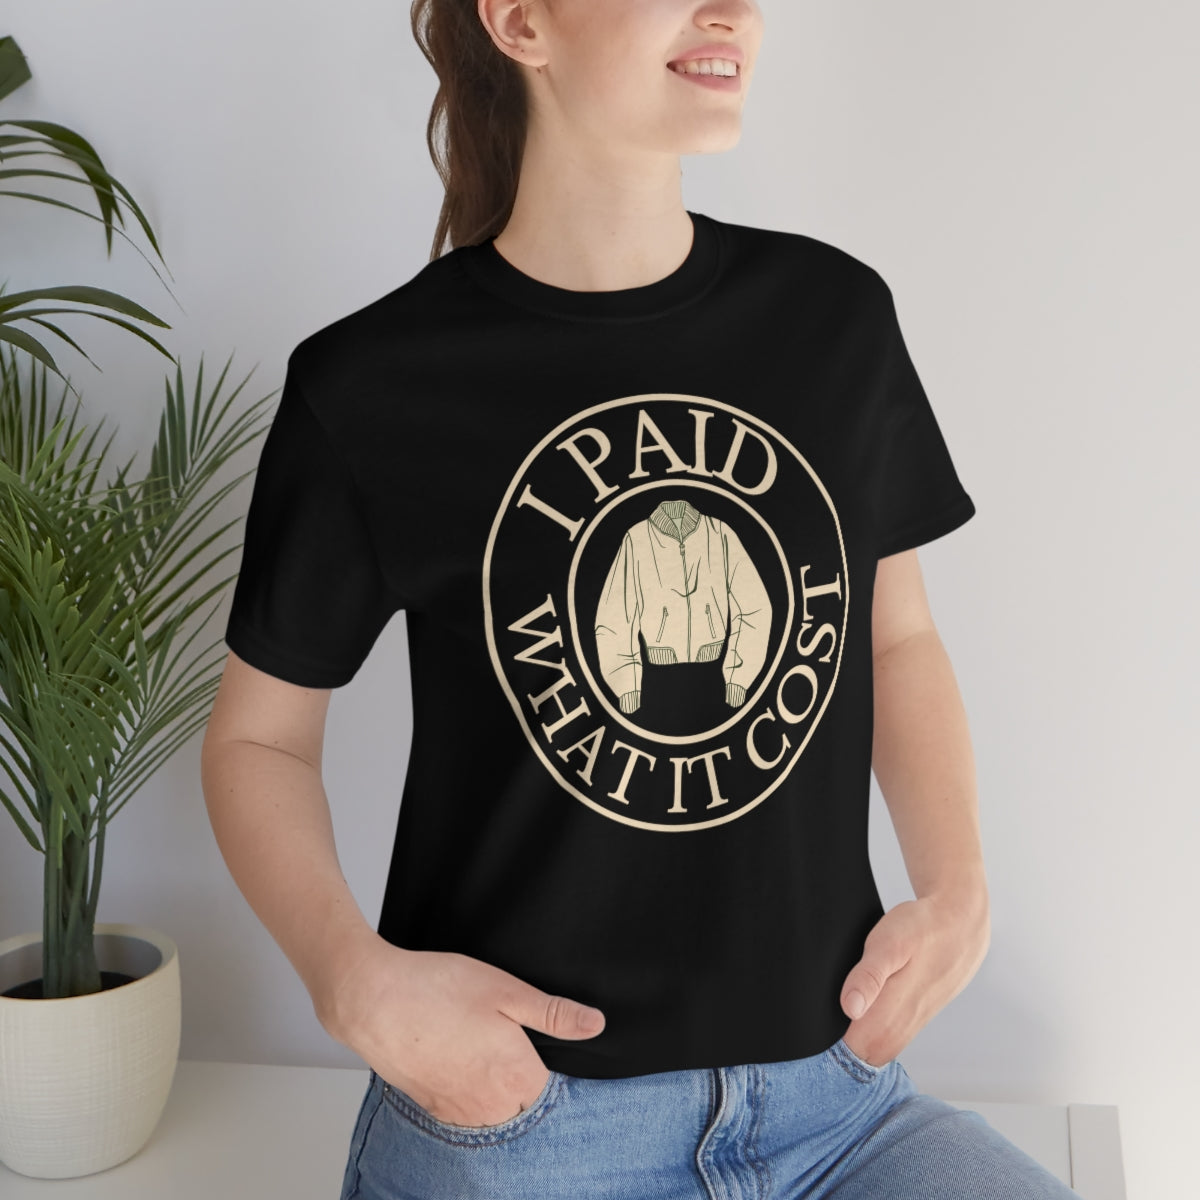 I Paid What It Cost Unisex Jersey Short Sleeve Tee